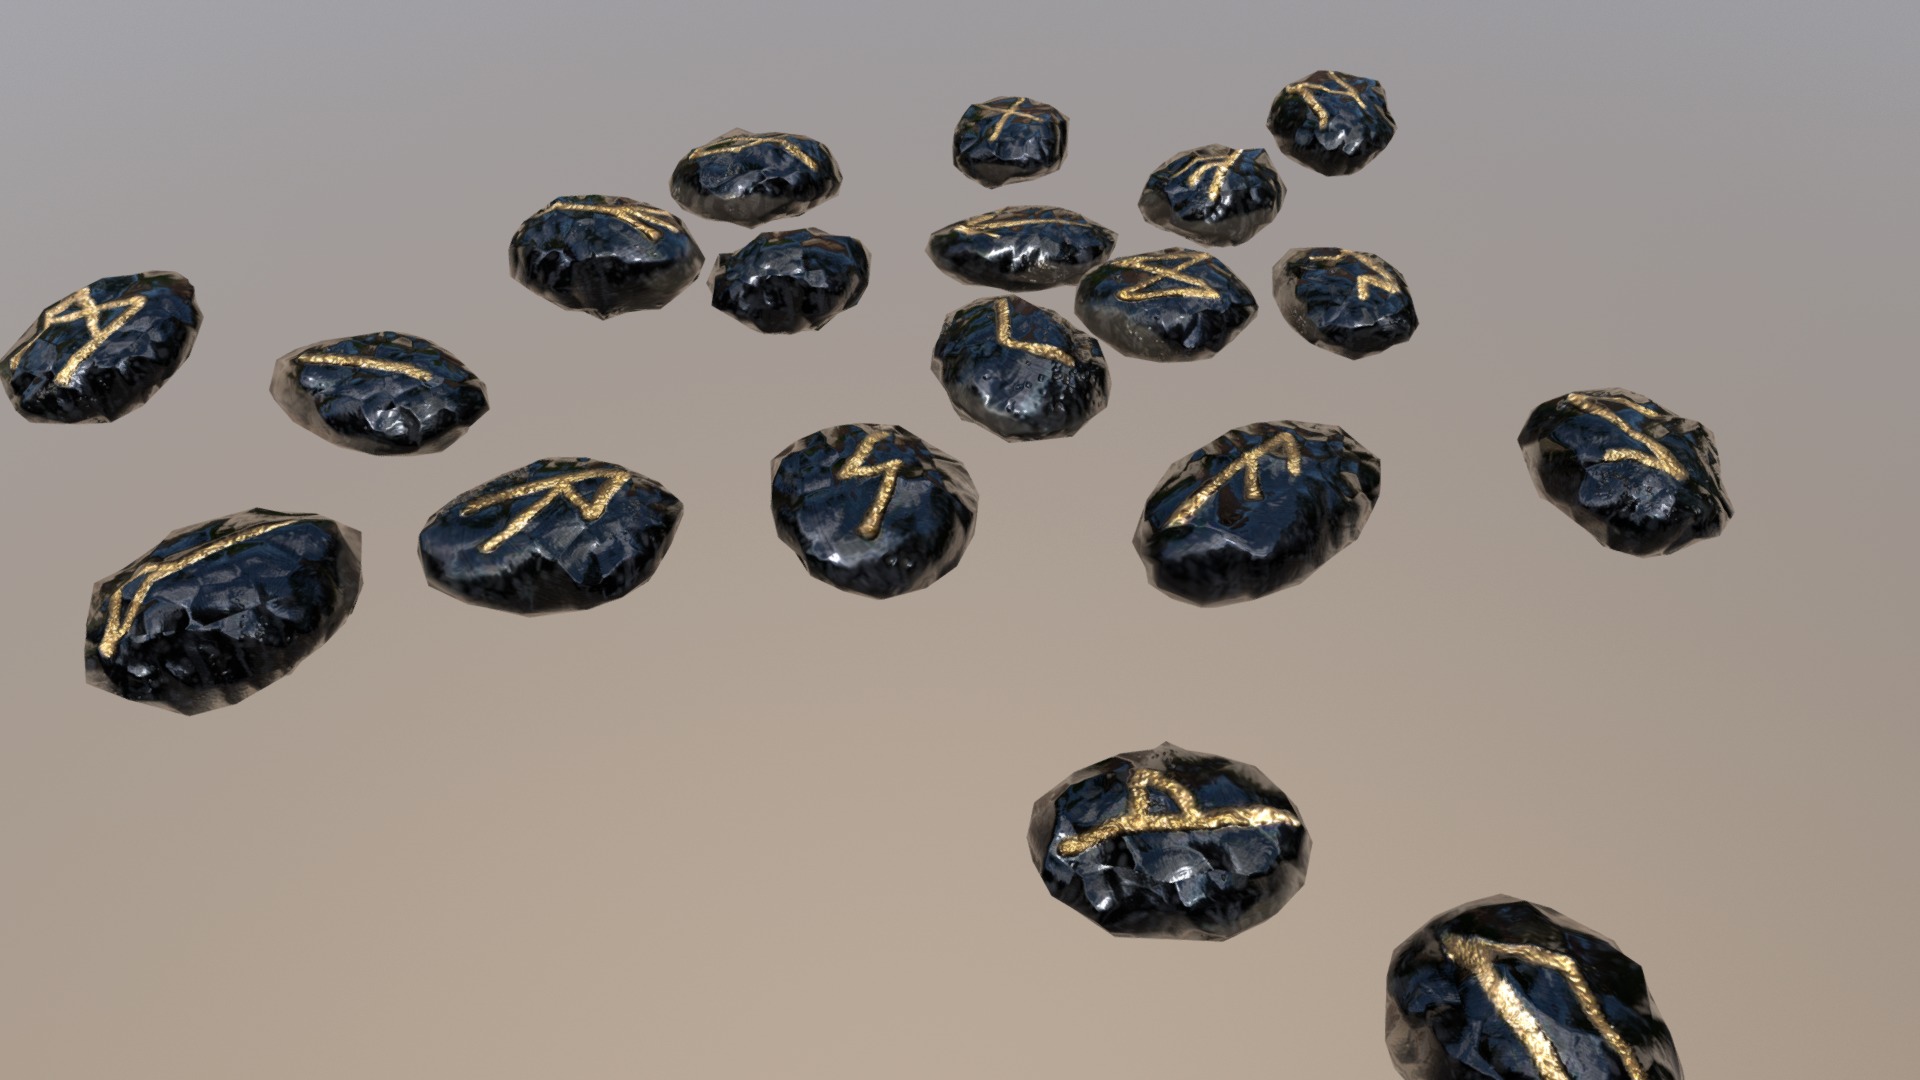 3D model Obsidian Rune Stones - This is a 3D model of the Obsidian Rune Stones. The 3D model is about a group of black and gold hats.